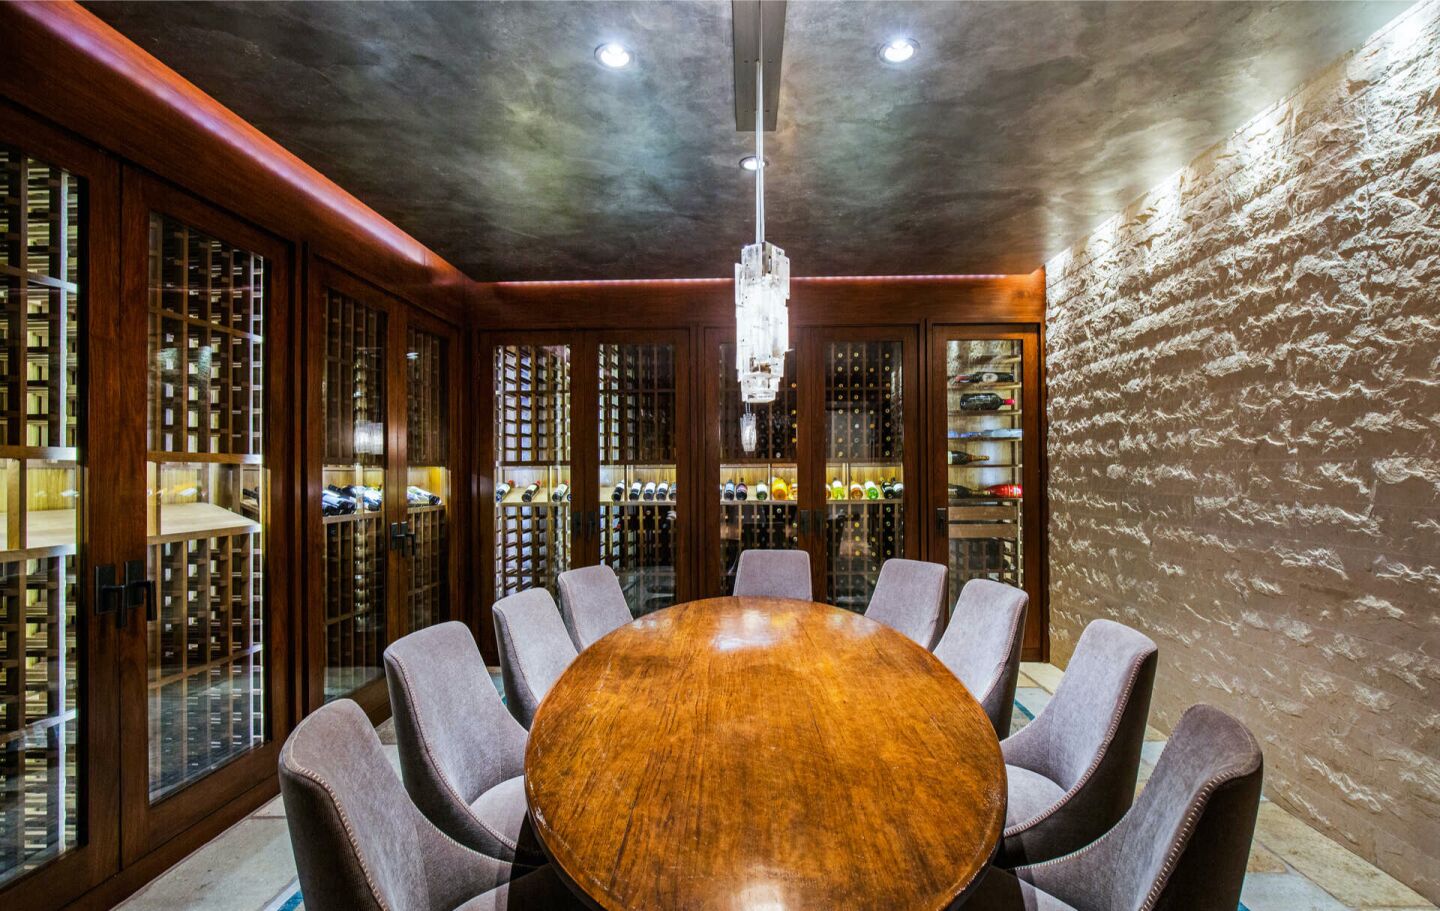 The wine cellar with a table surrounding by chairs.